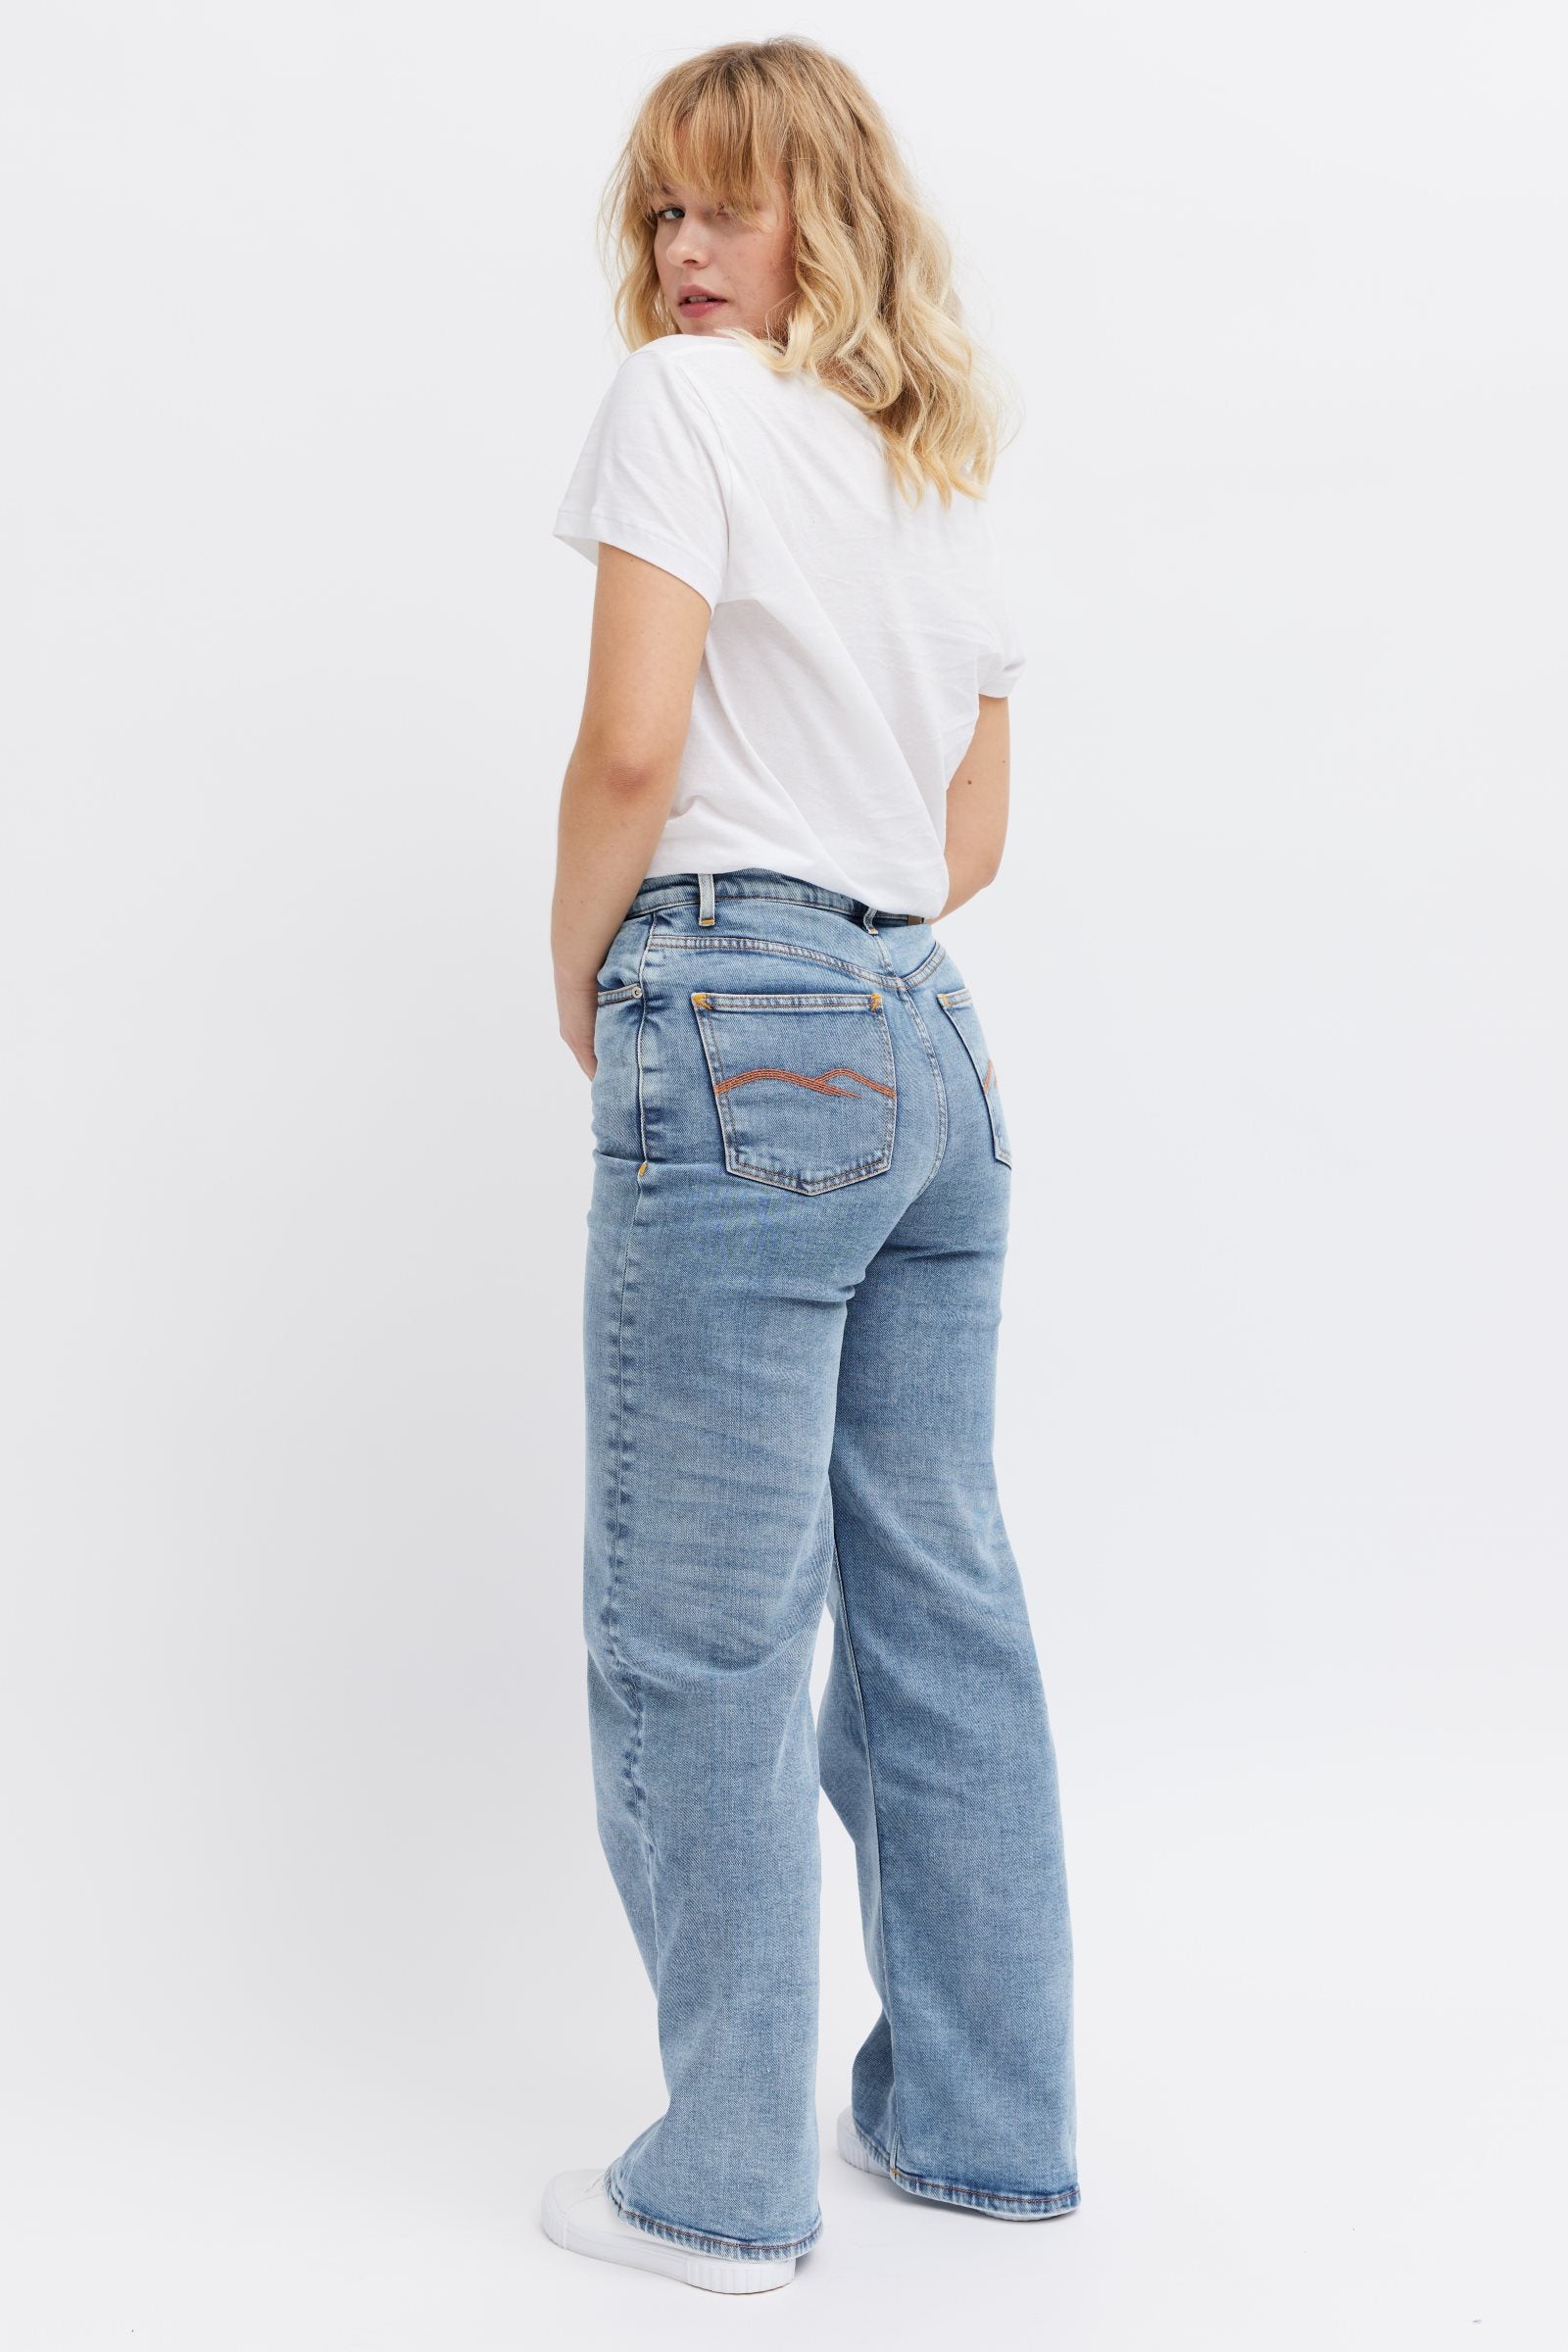  Organic denim jeans. Comfy style for different body types